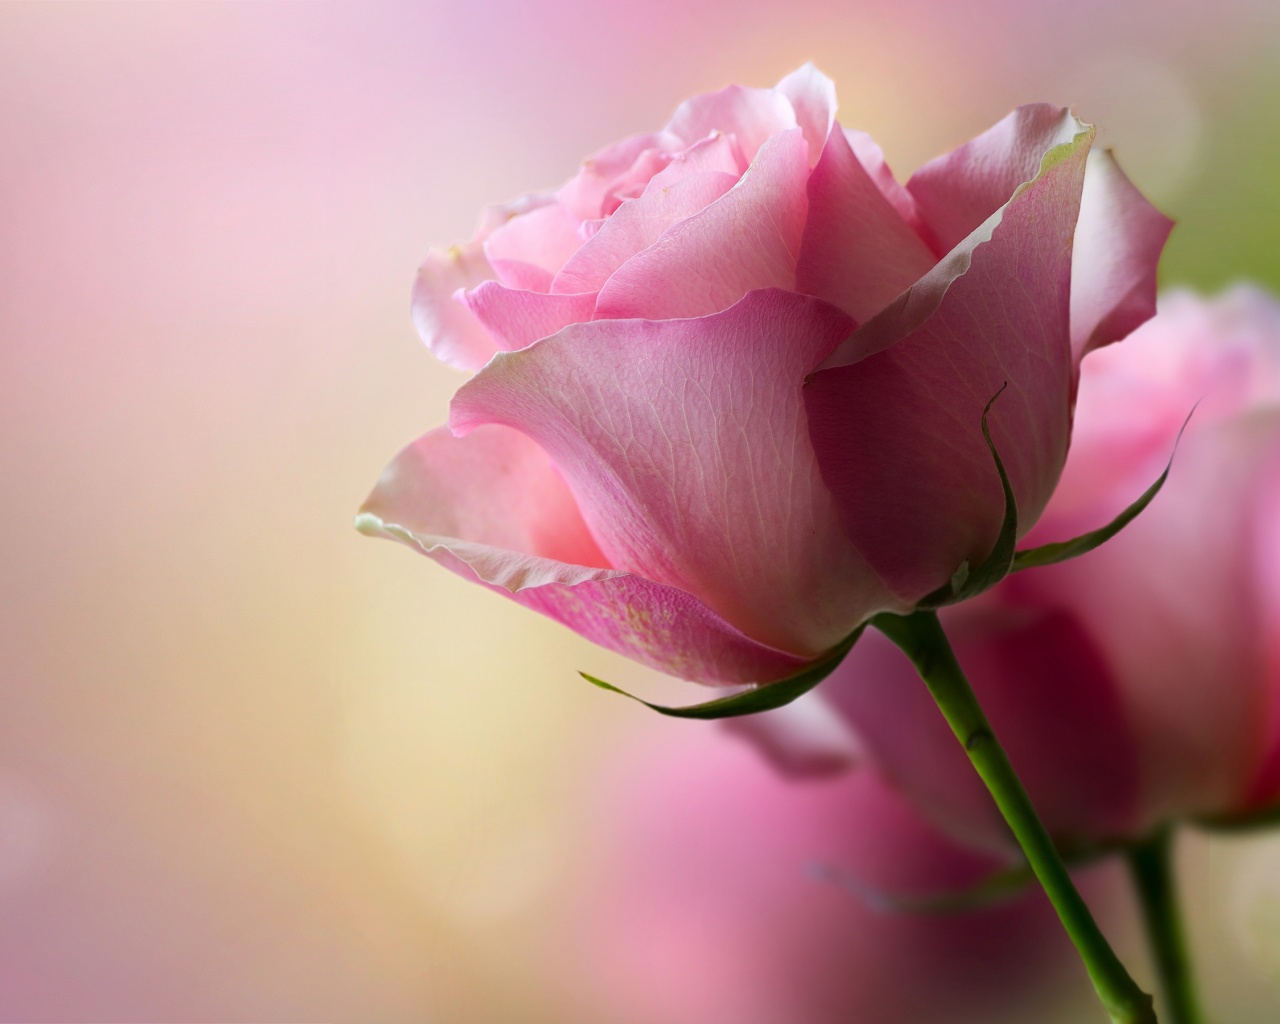 Pink Rose Wallpaper 11012 Hd Wallpapers in Flowers   Imagescicom